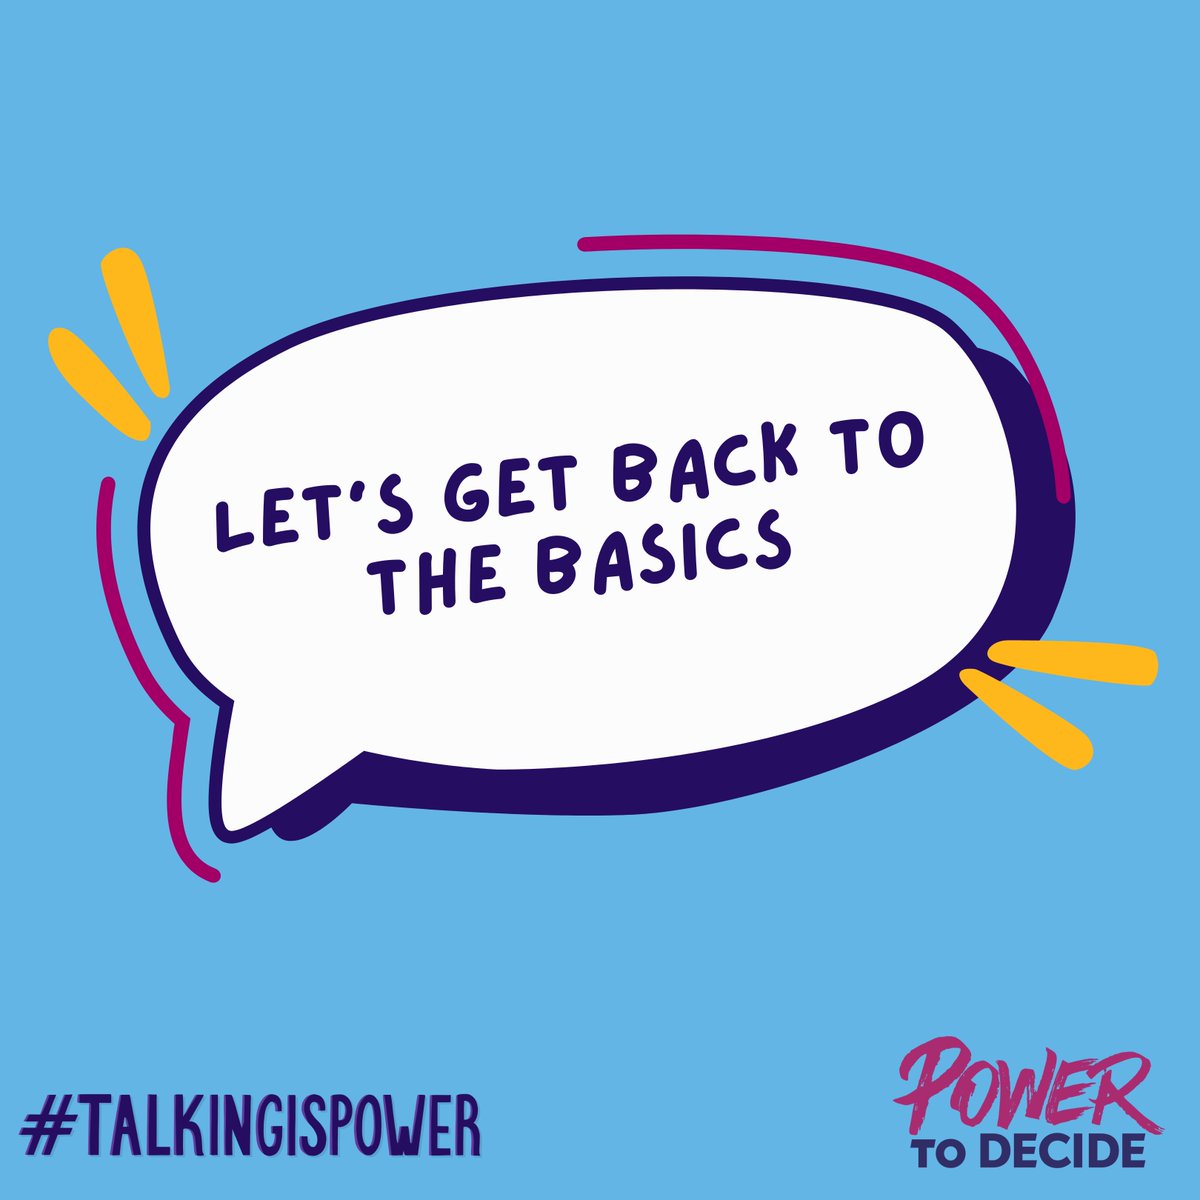 It's more important than ever to let the young people know that you are there to support them through their questions and curiosities, no matter what! Learn more: powertodecide.org/talkingispower #TalkingIsPower